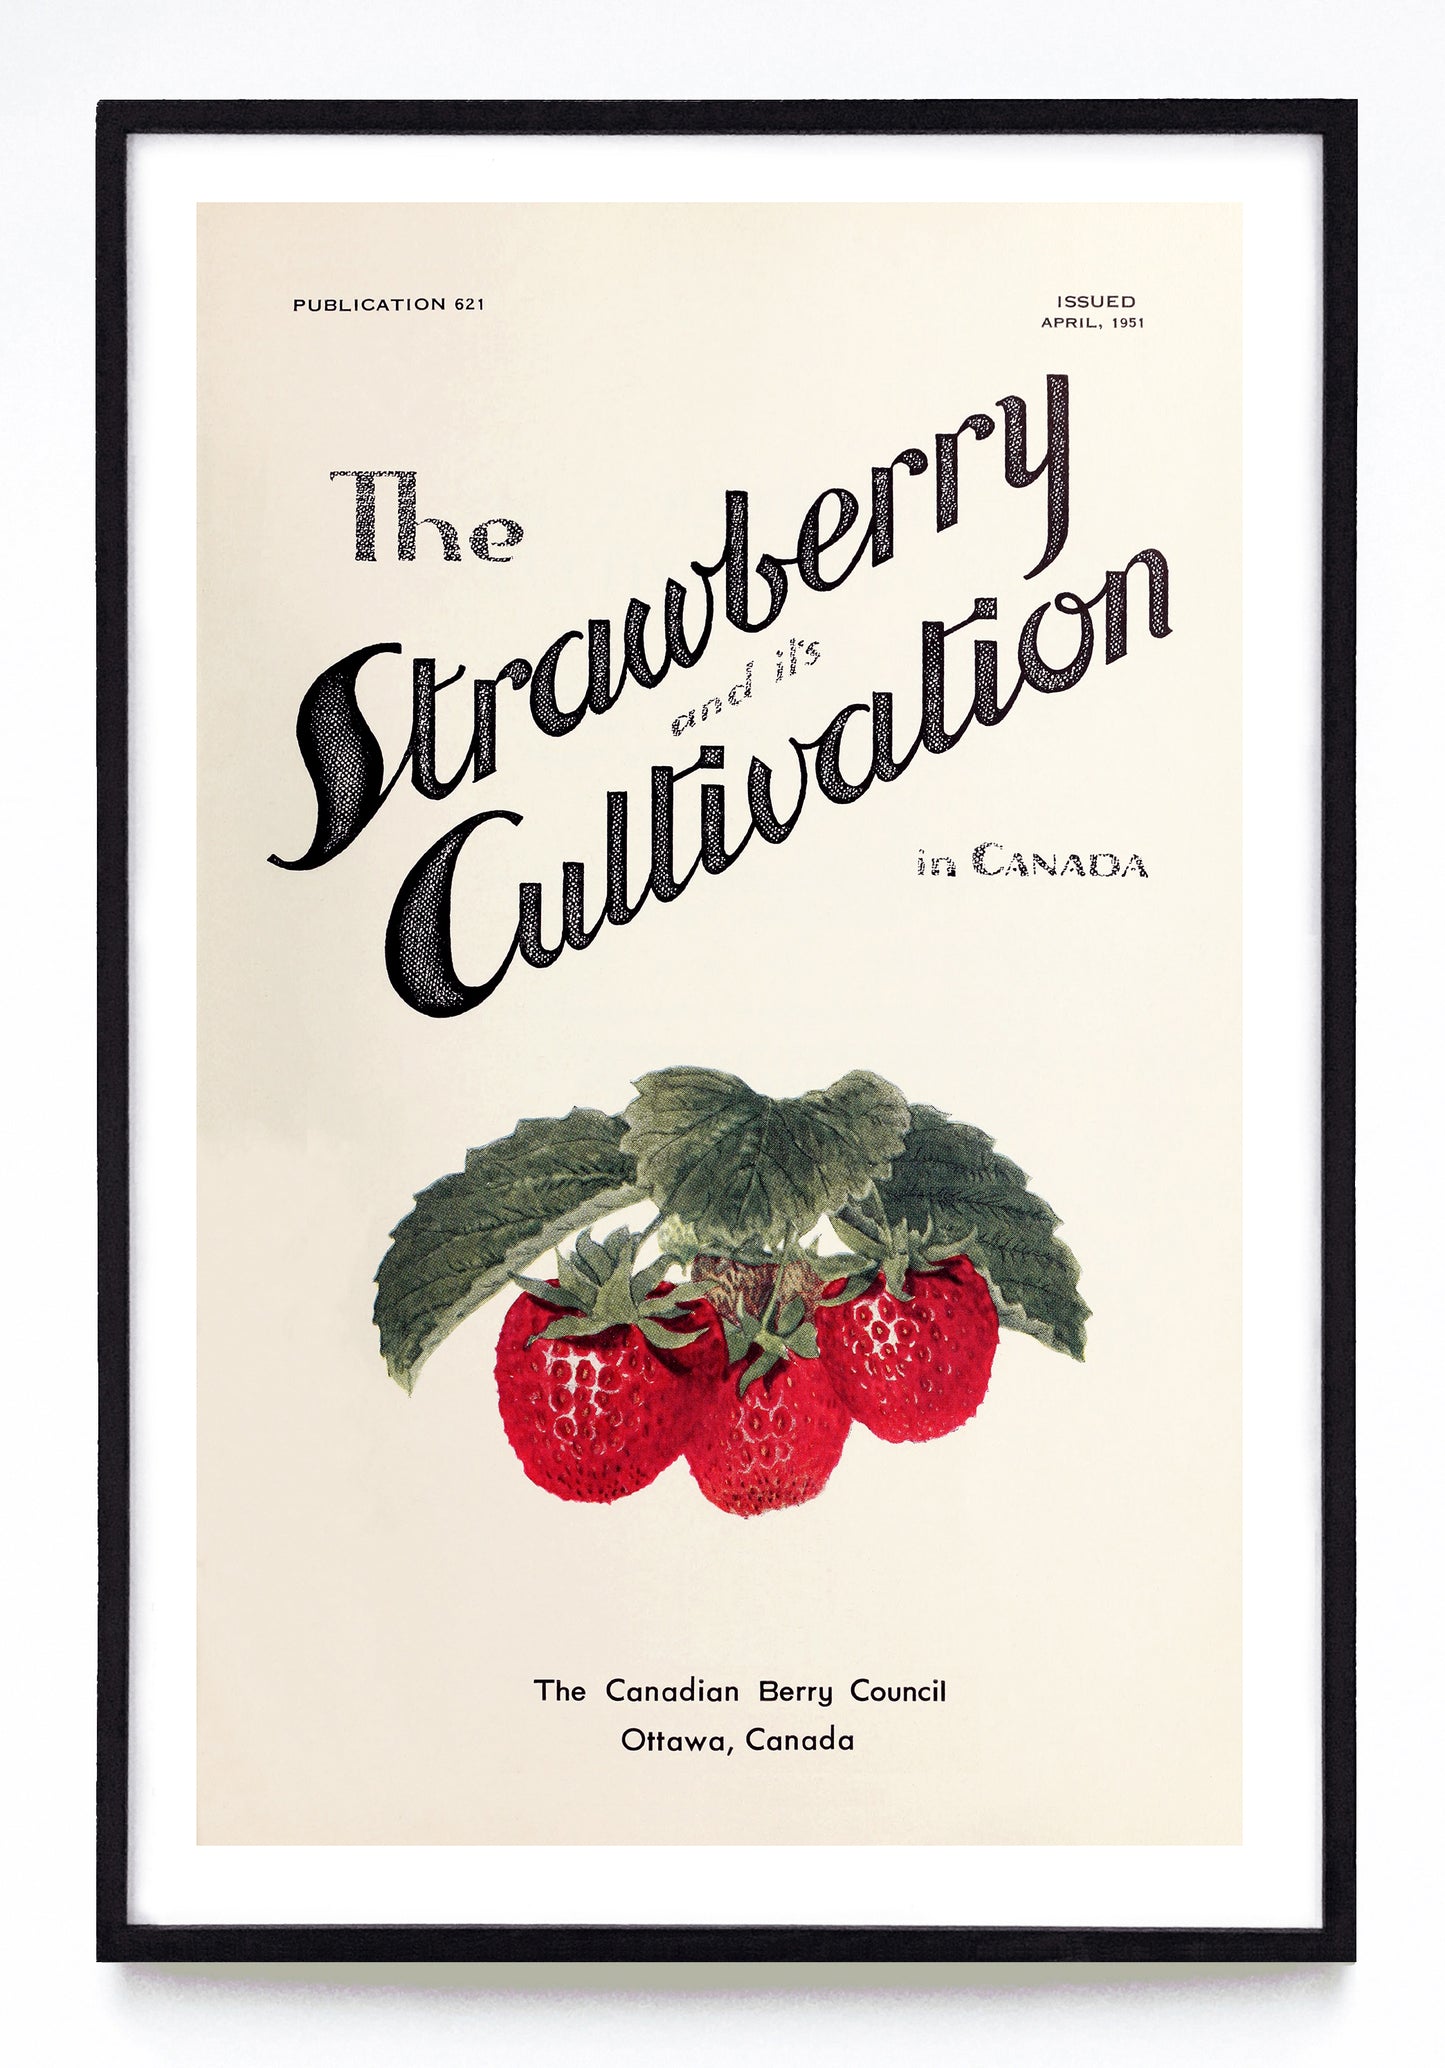 "The Strawberry and Its Cultivation in Canada" and "Le Fraisier et Sa Culture au Canada" prints (1951)